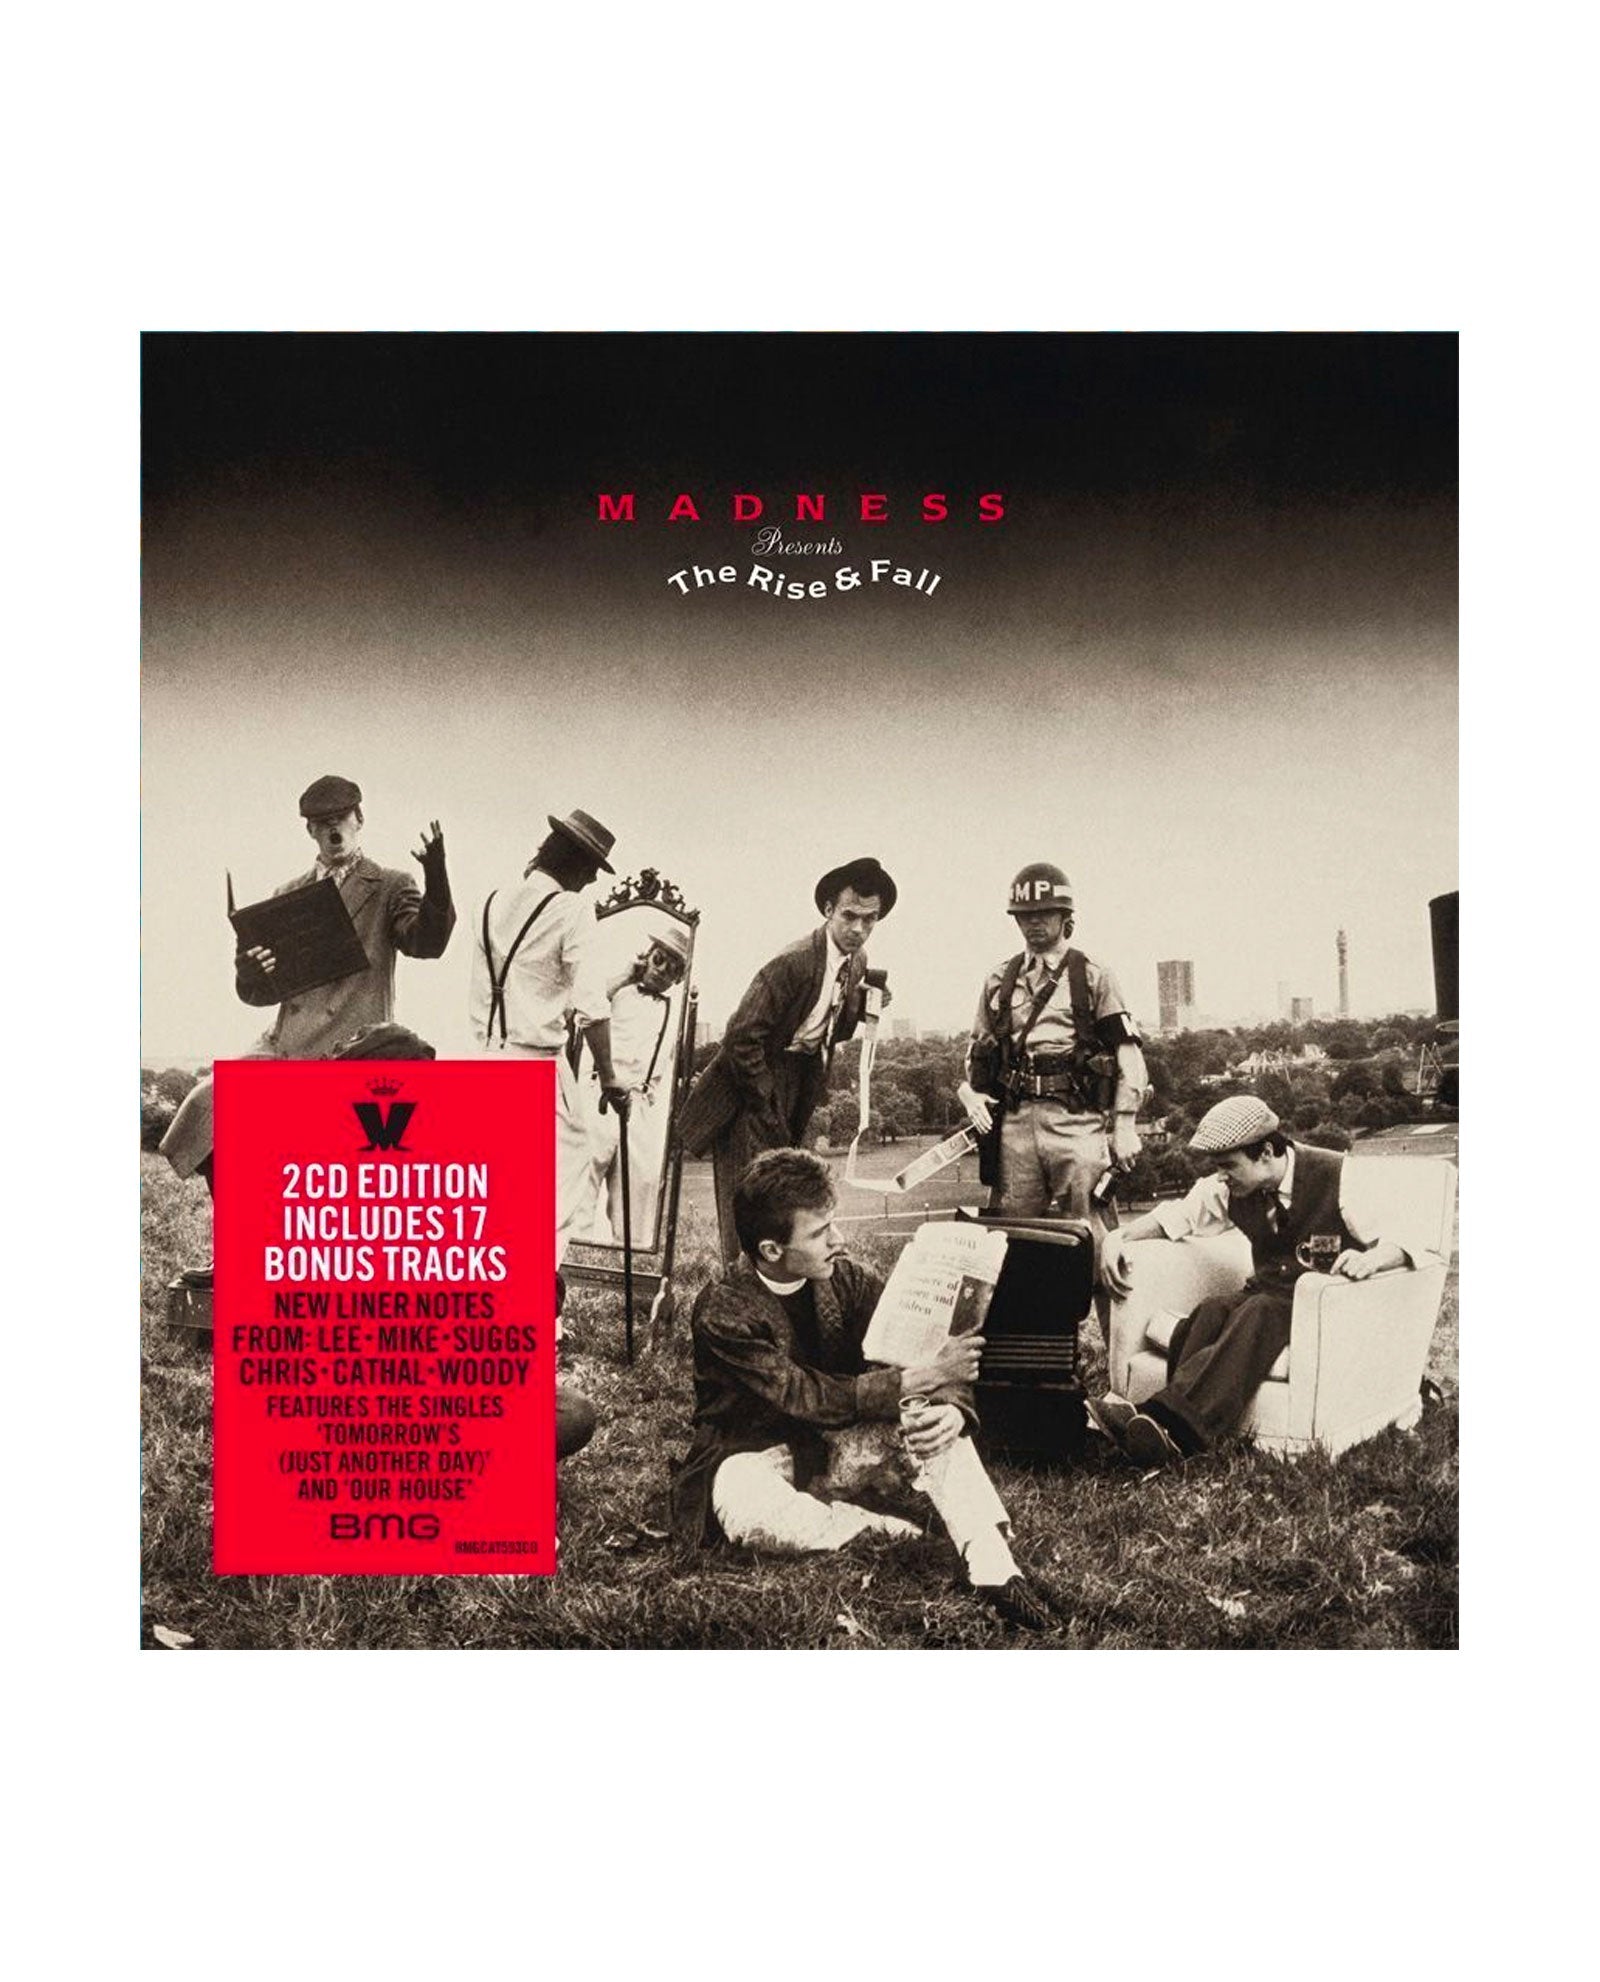 Madness - 2CD Deluxe "The Rise And Fall" - D2fy · Rocktud - Rocktud